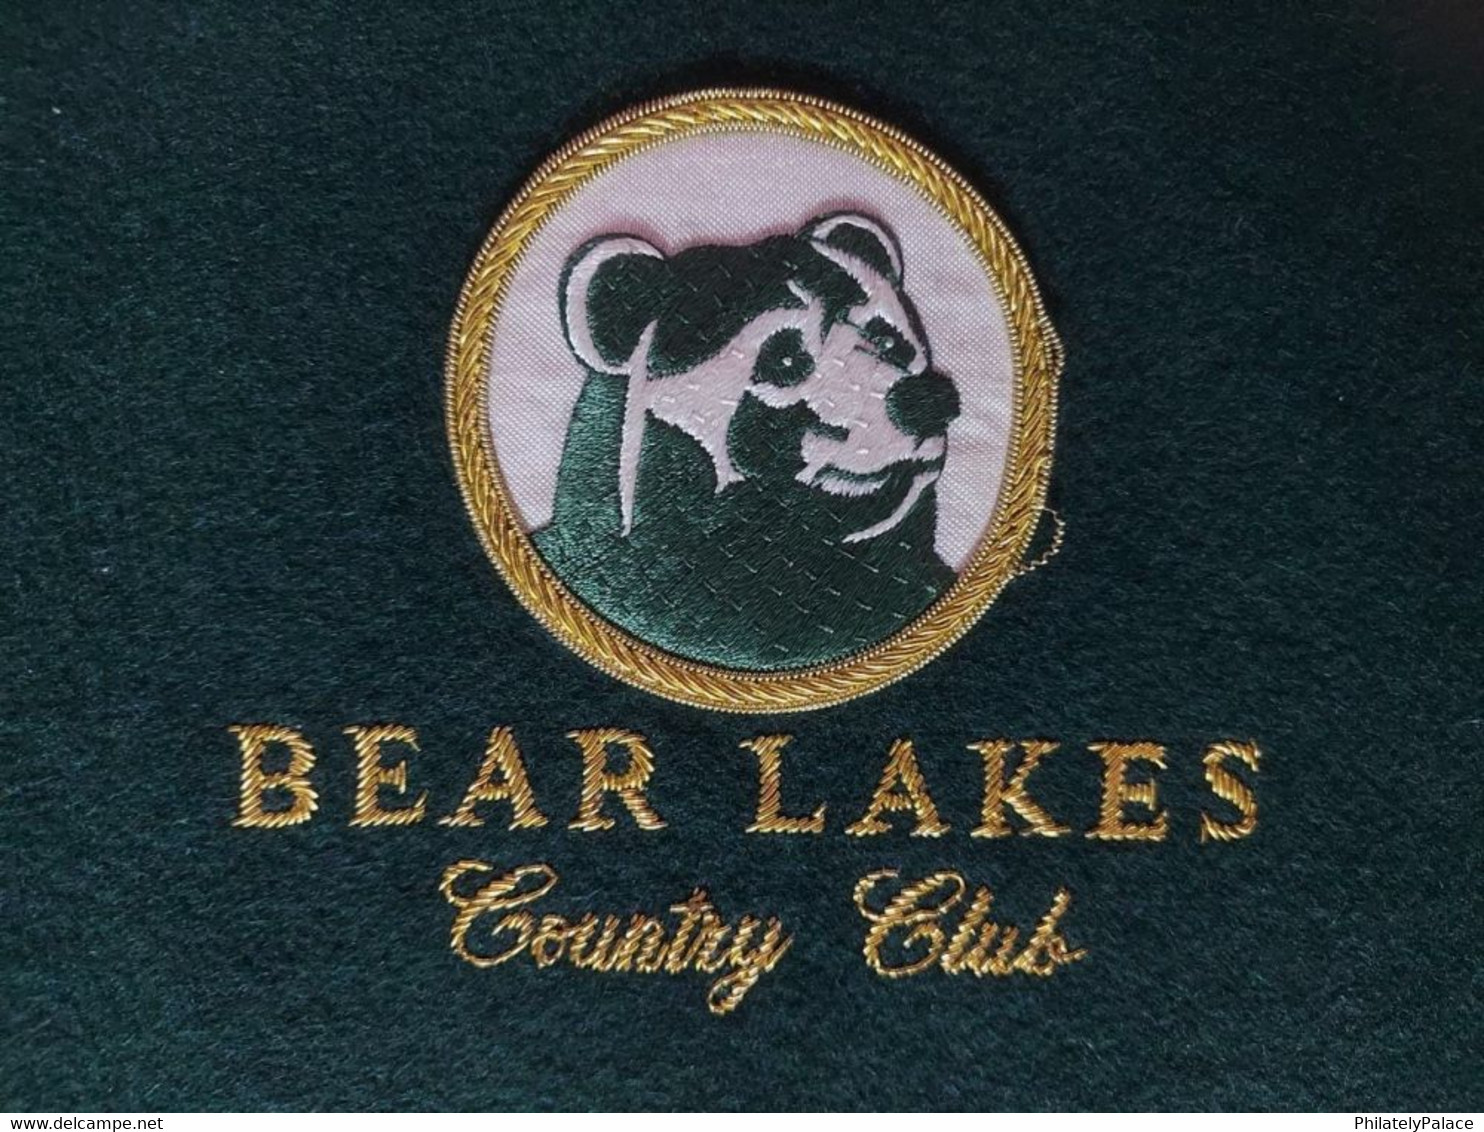 Bear Lakes County Club Related To Golf Sports, Blazer Pocket Badge (**) - Habillement, Souvenirs & Autres